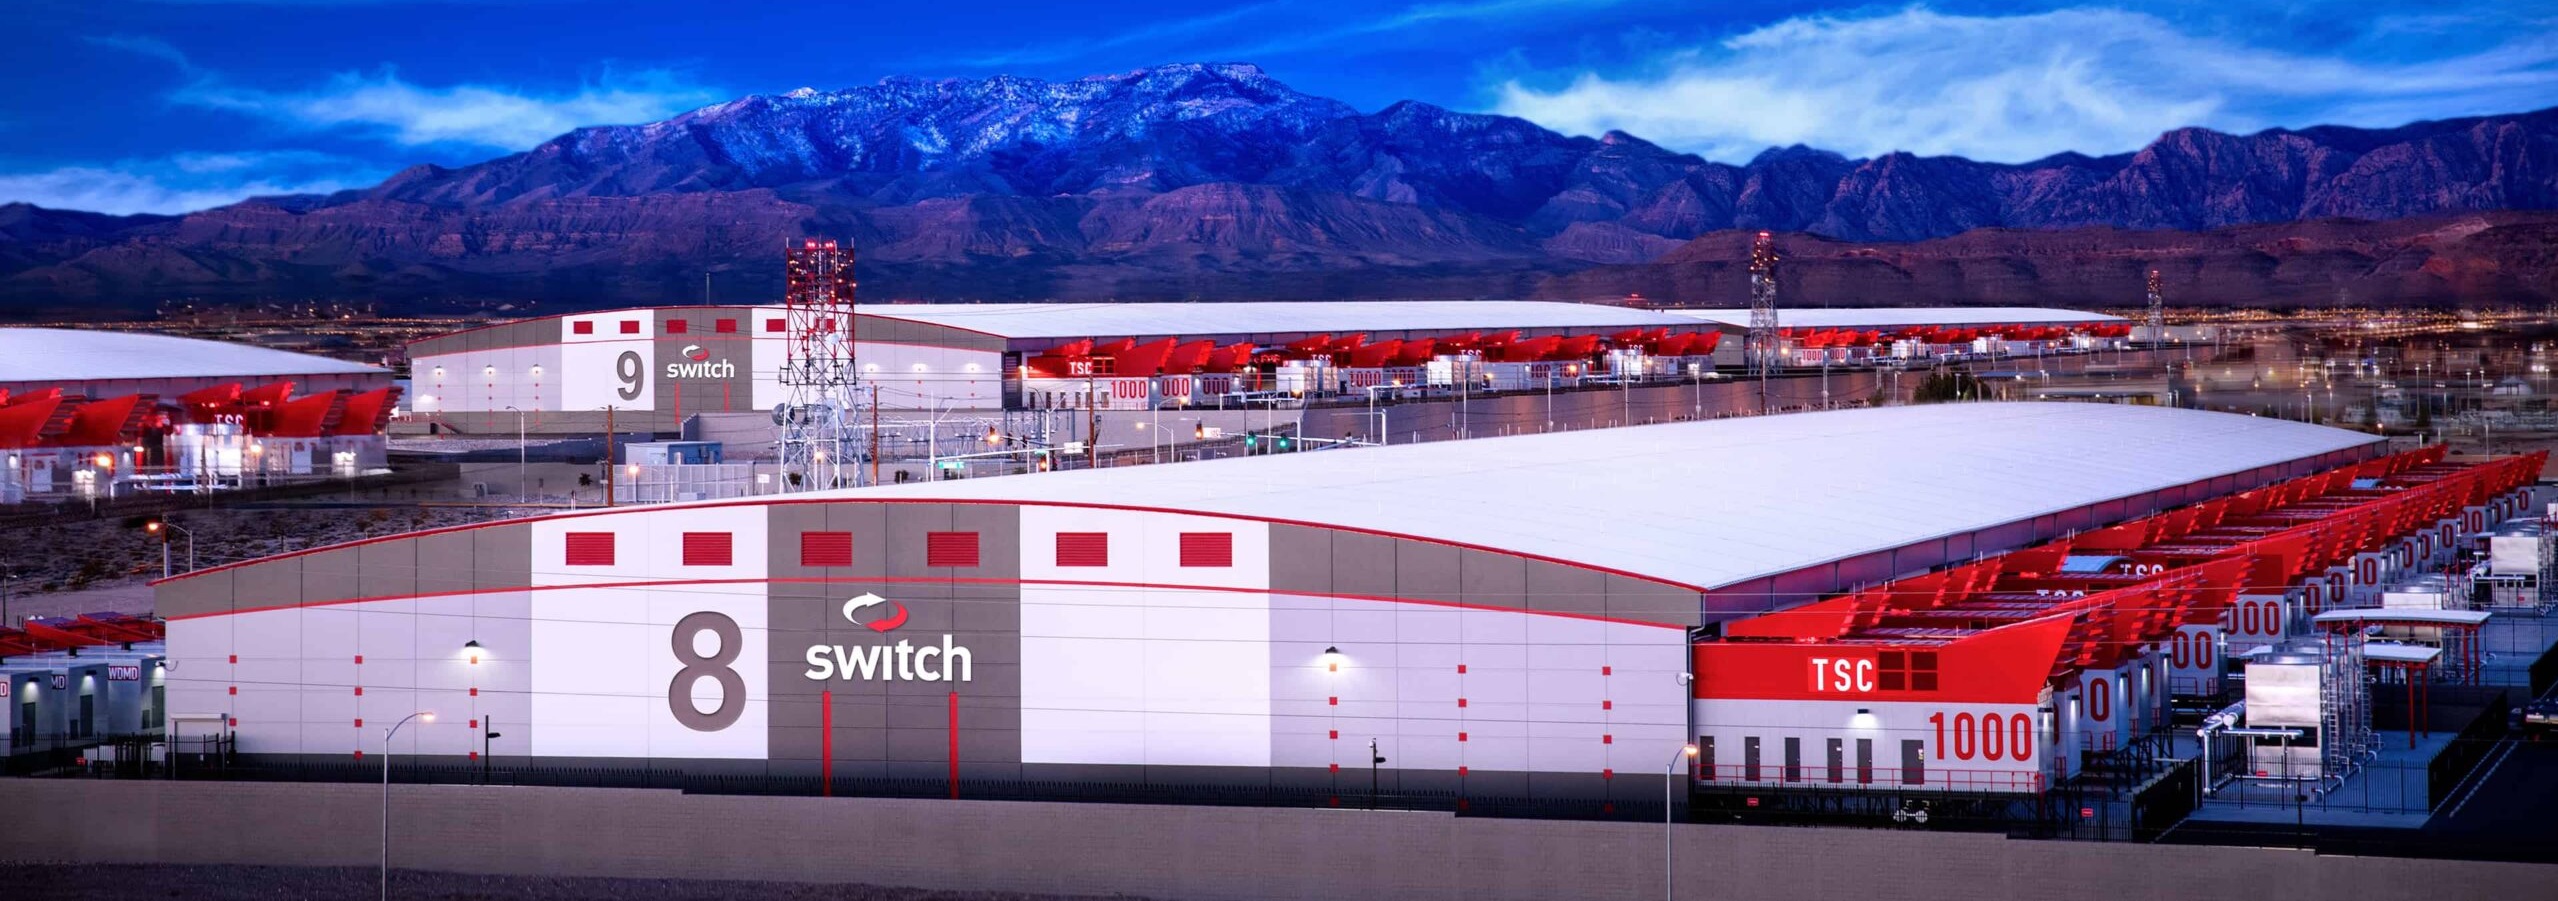 The Switch data center has been affected by several earthquakes exceeding magnitude 5, yet it remains fortified and prepared for any future seismic events.